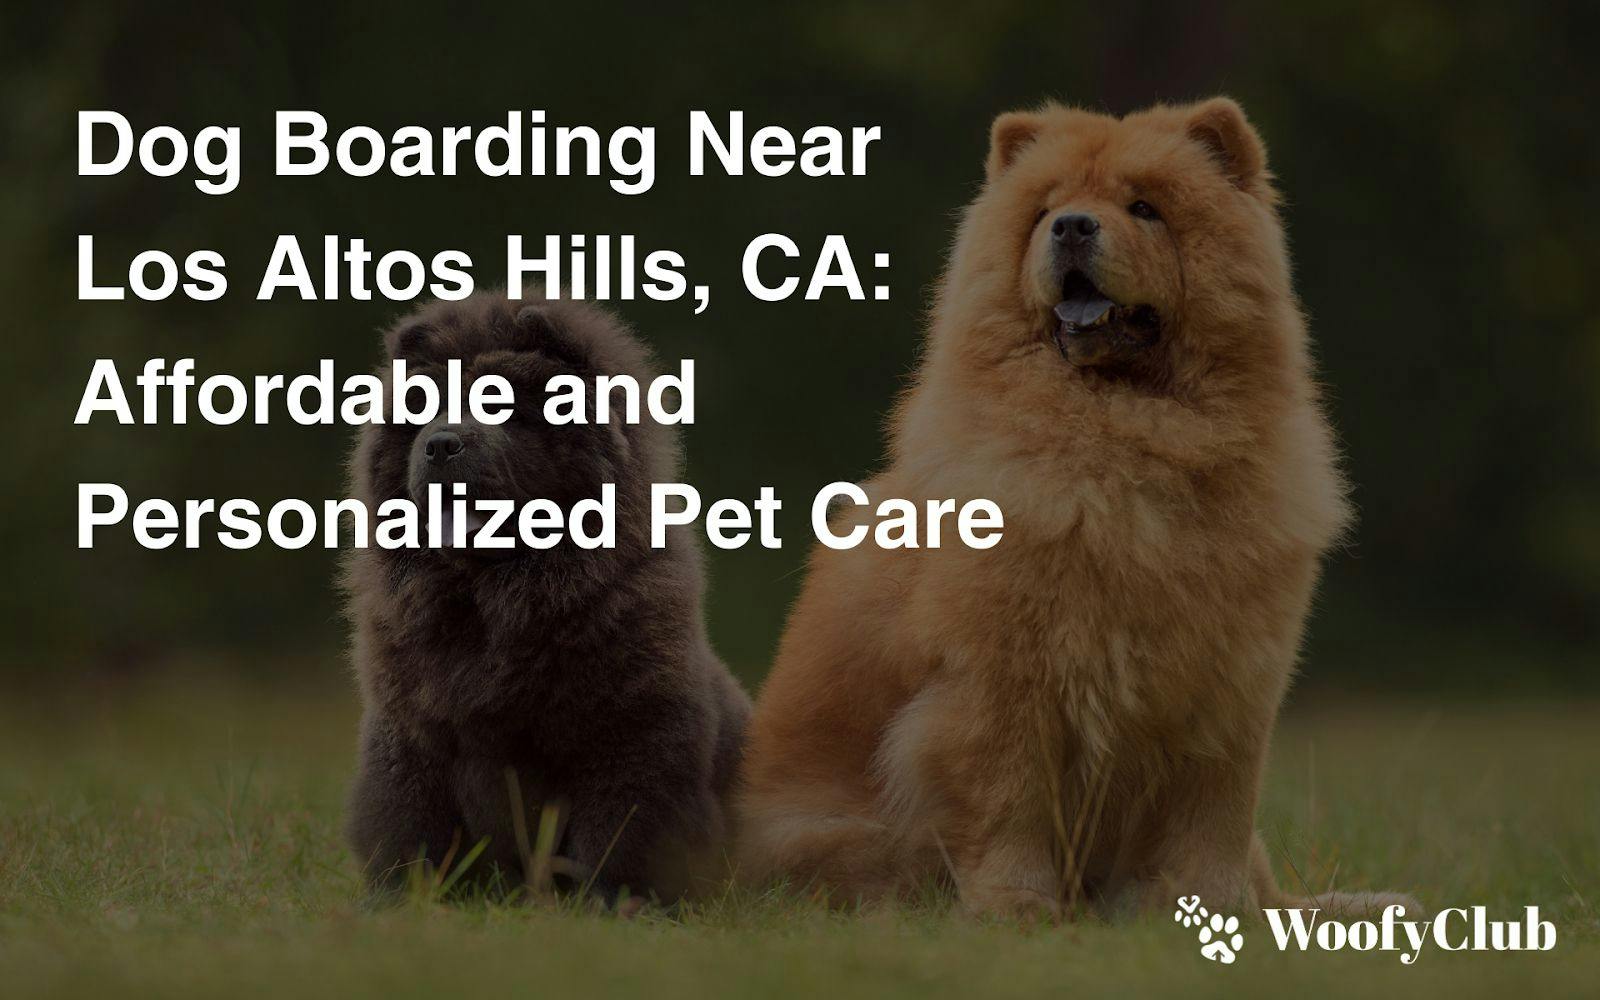 Dog Boarding Near Los Altos Hills, CA: Affordable And Personalized Pet Care